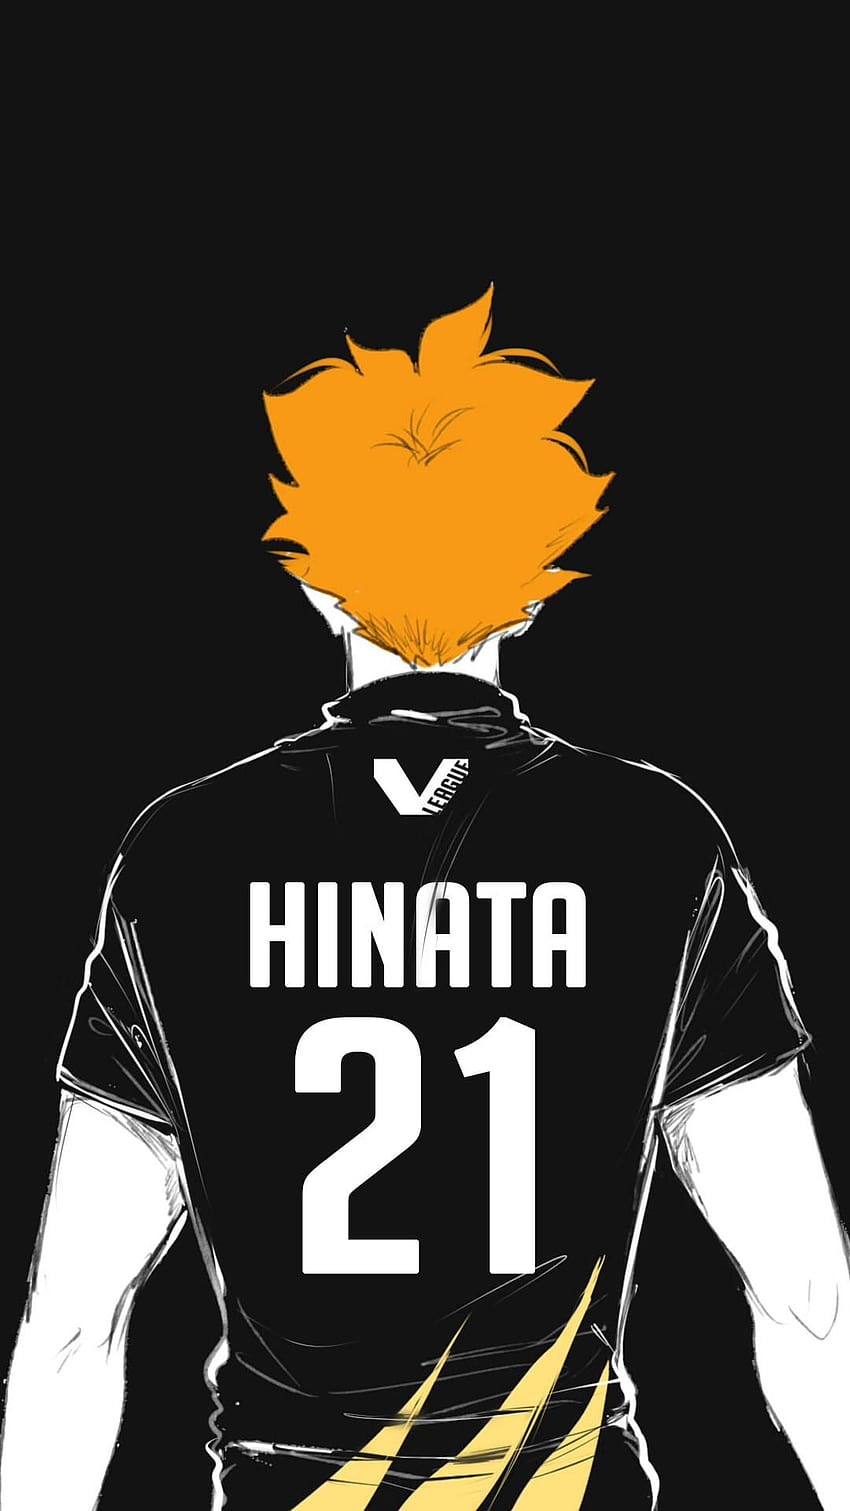 300+] Haikyuu Pictures | Wallpapers.com